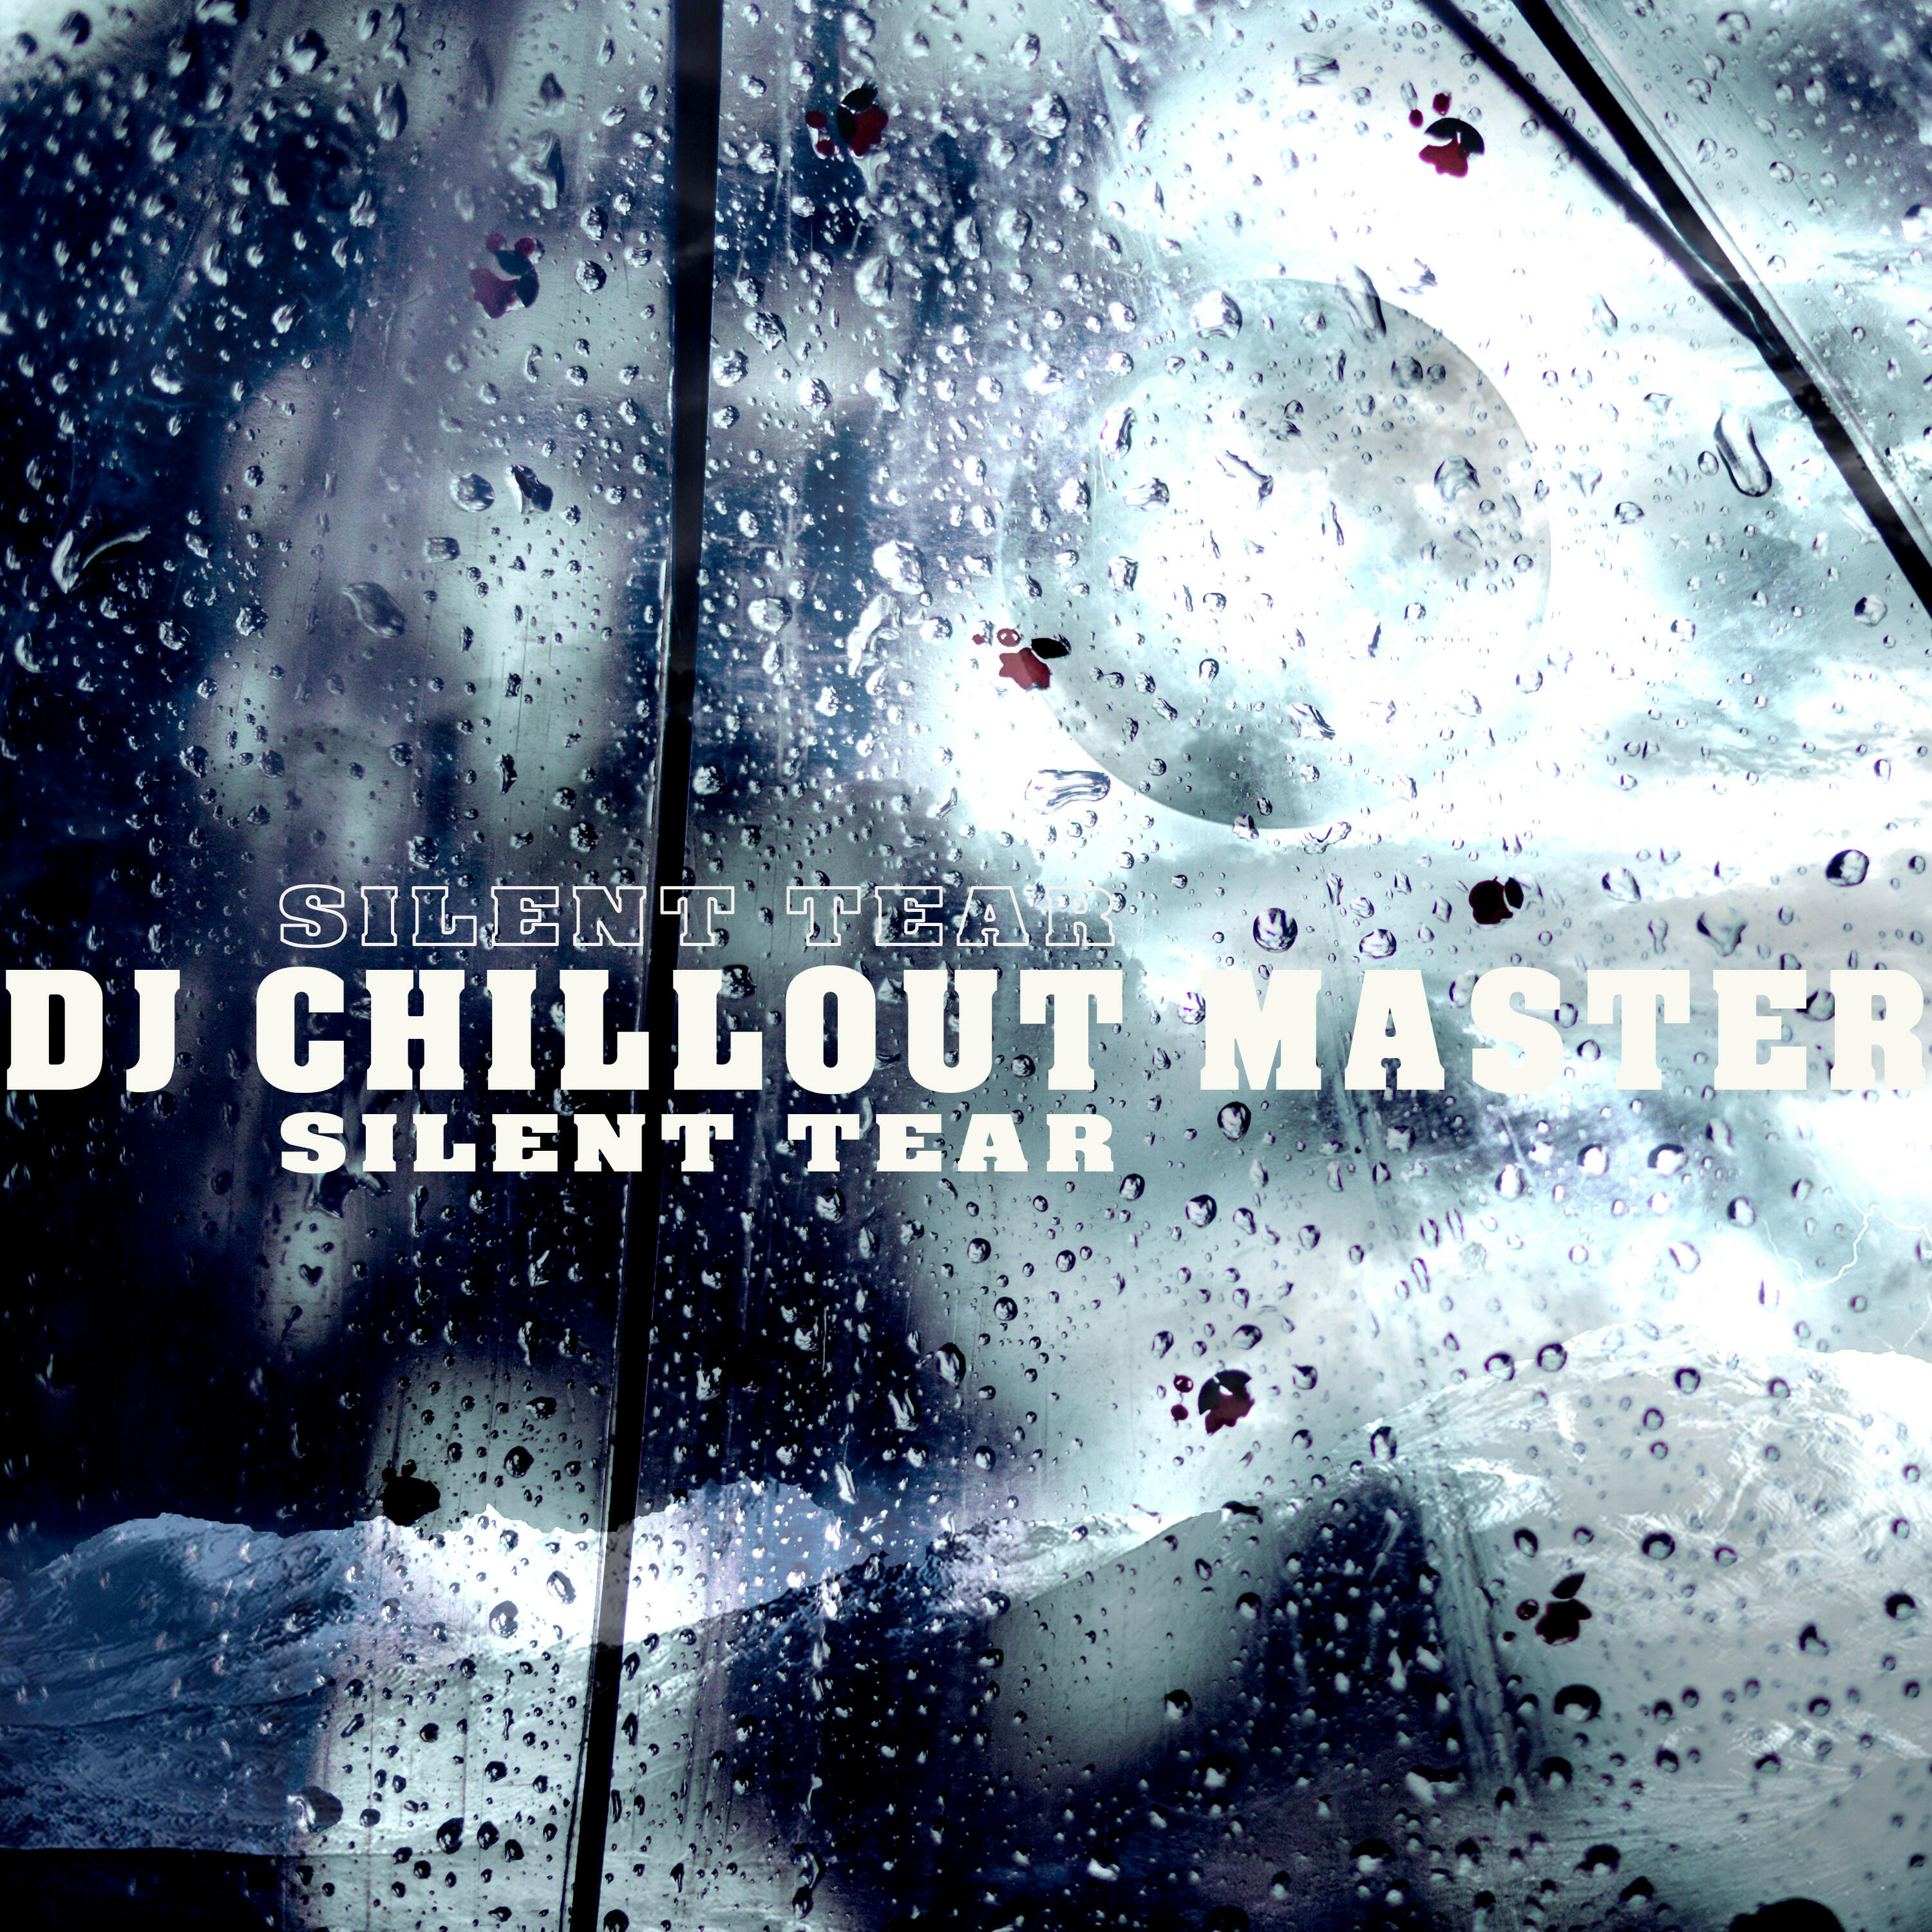 Silent tears. Tears of a Silent Heart. Silent tears Chinese. Inside a Silent tear текст. Dj chill